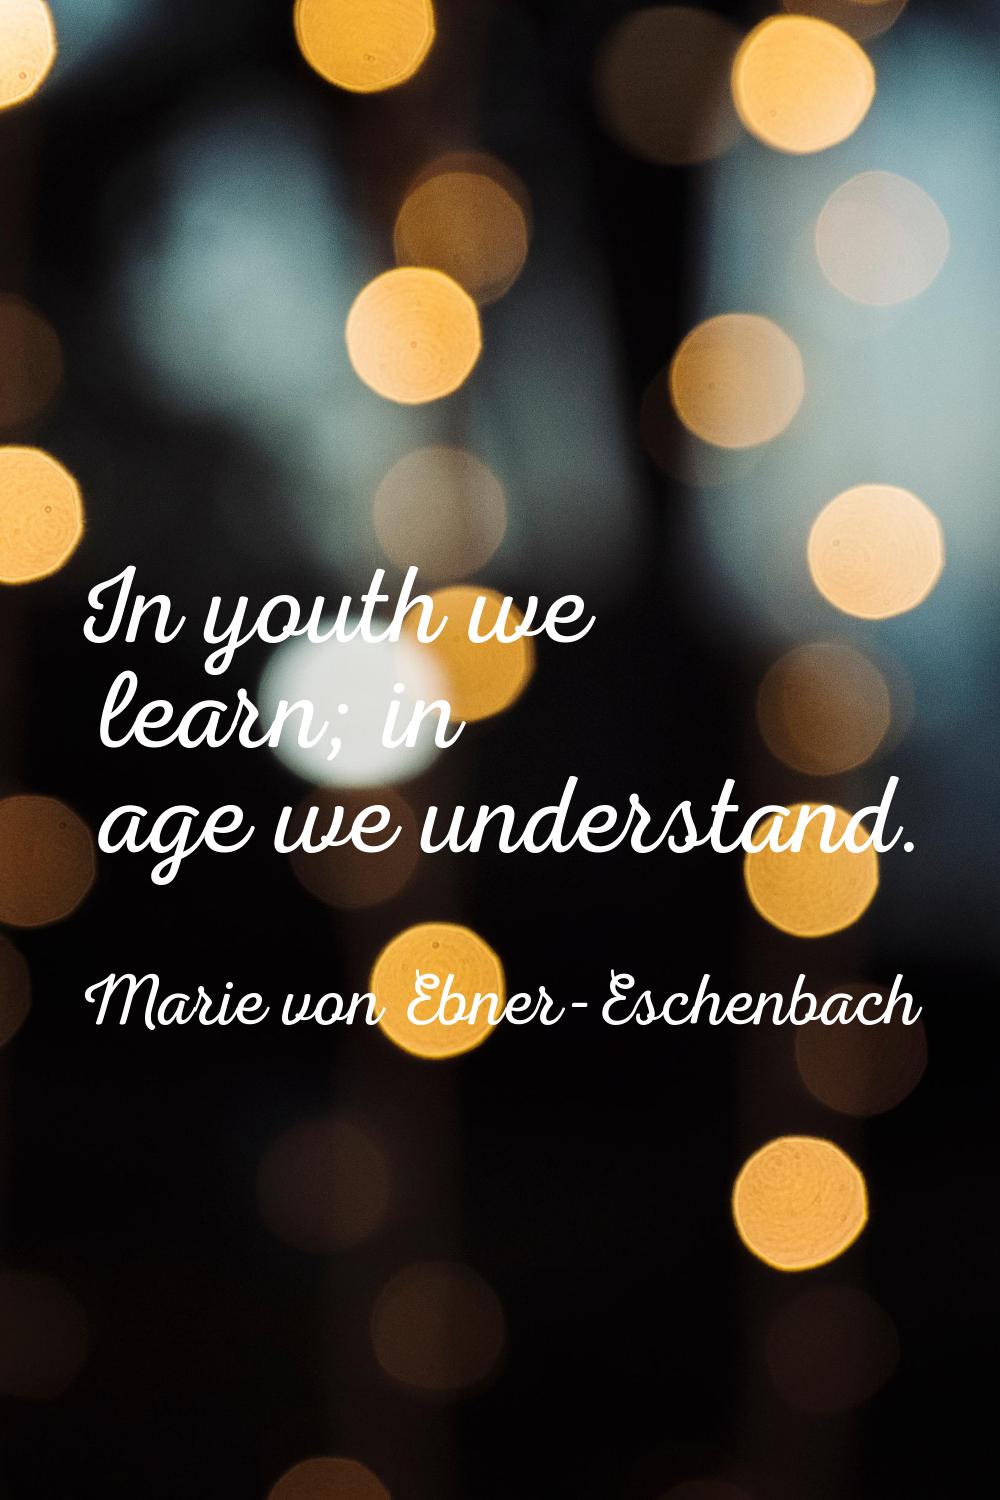 In youth we learn; in age we understand.